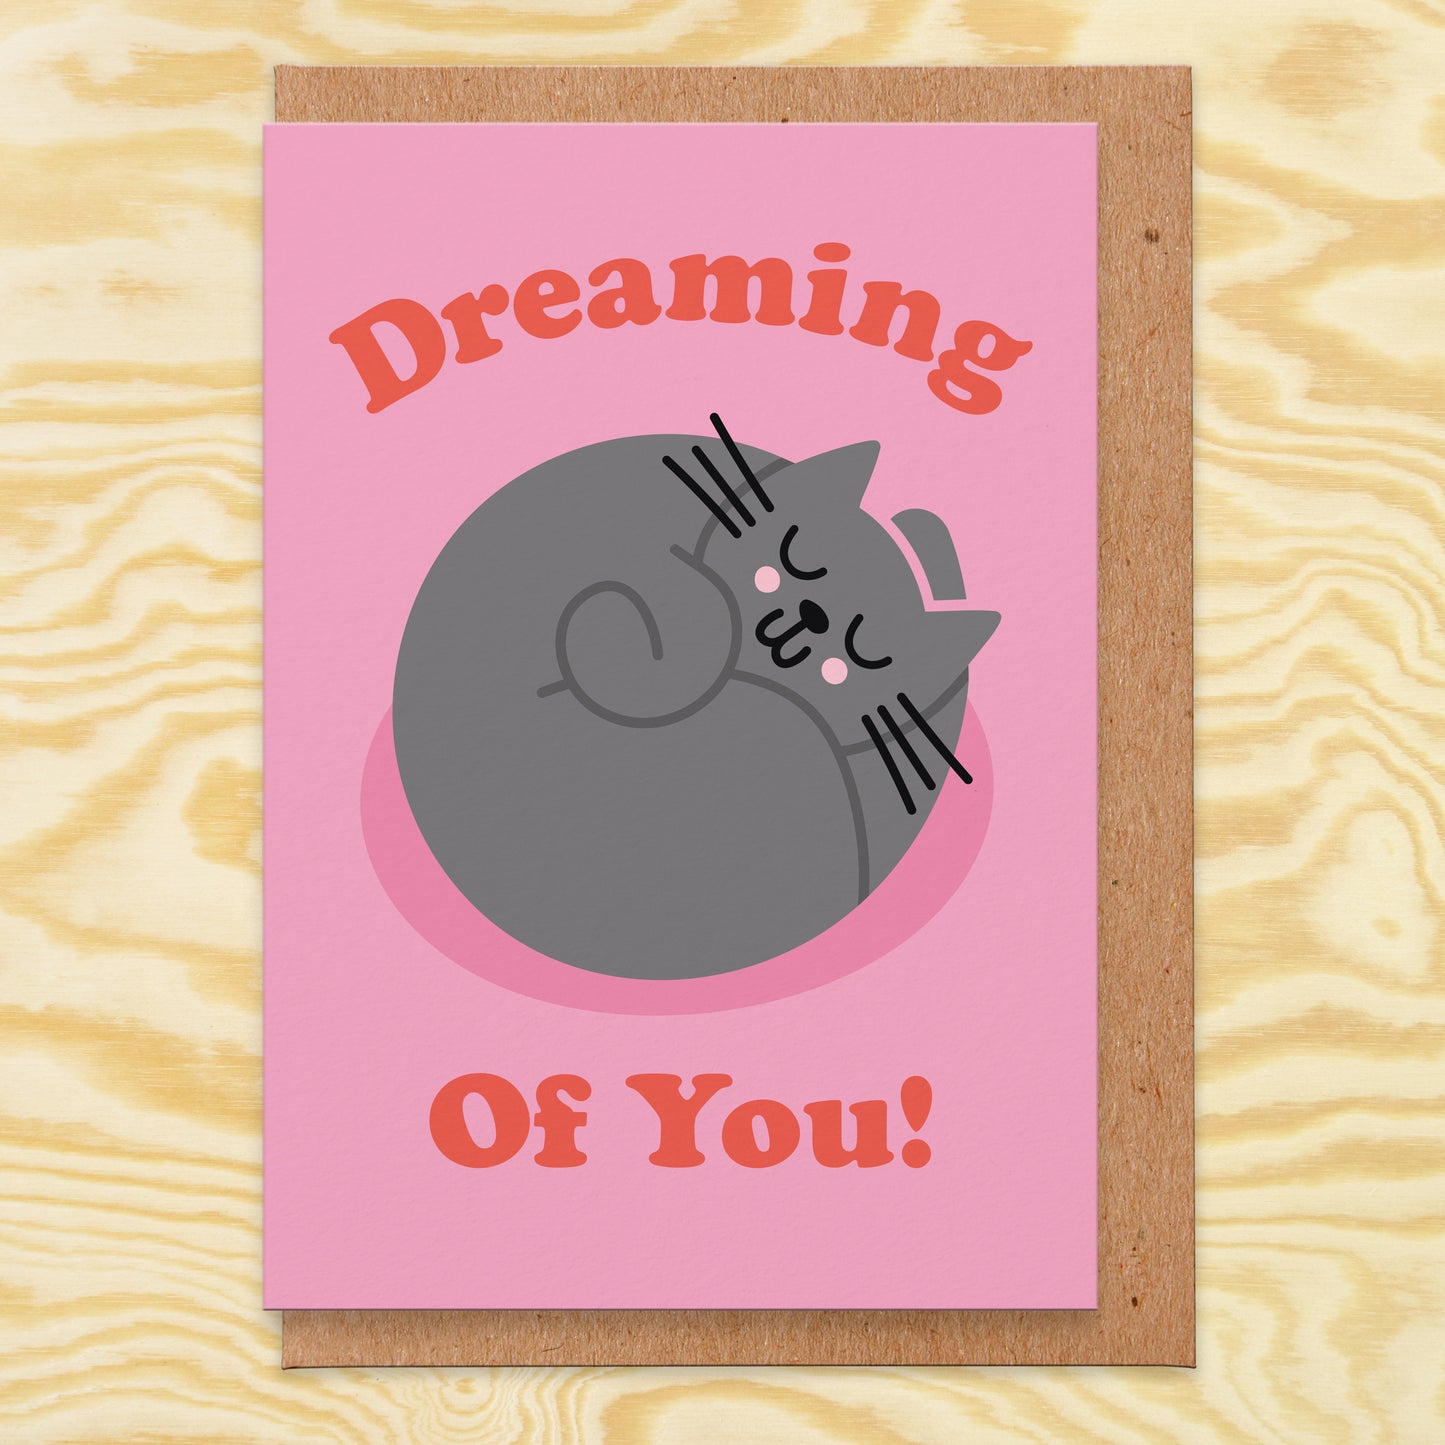 Love card with an illustration of a sleeping grey cat curled up in a ball and the text reads dreaming of you!